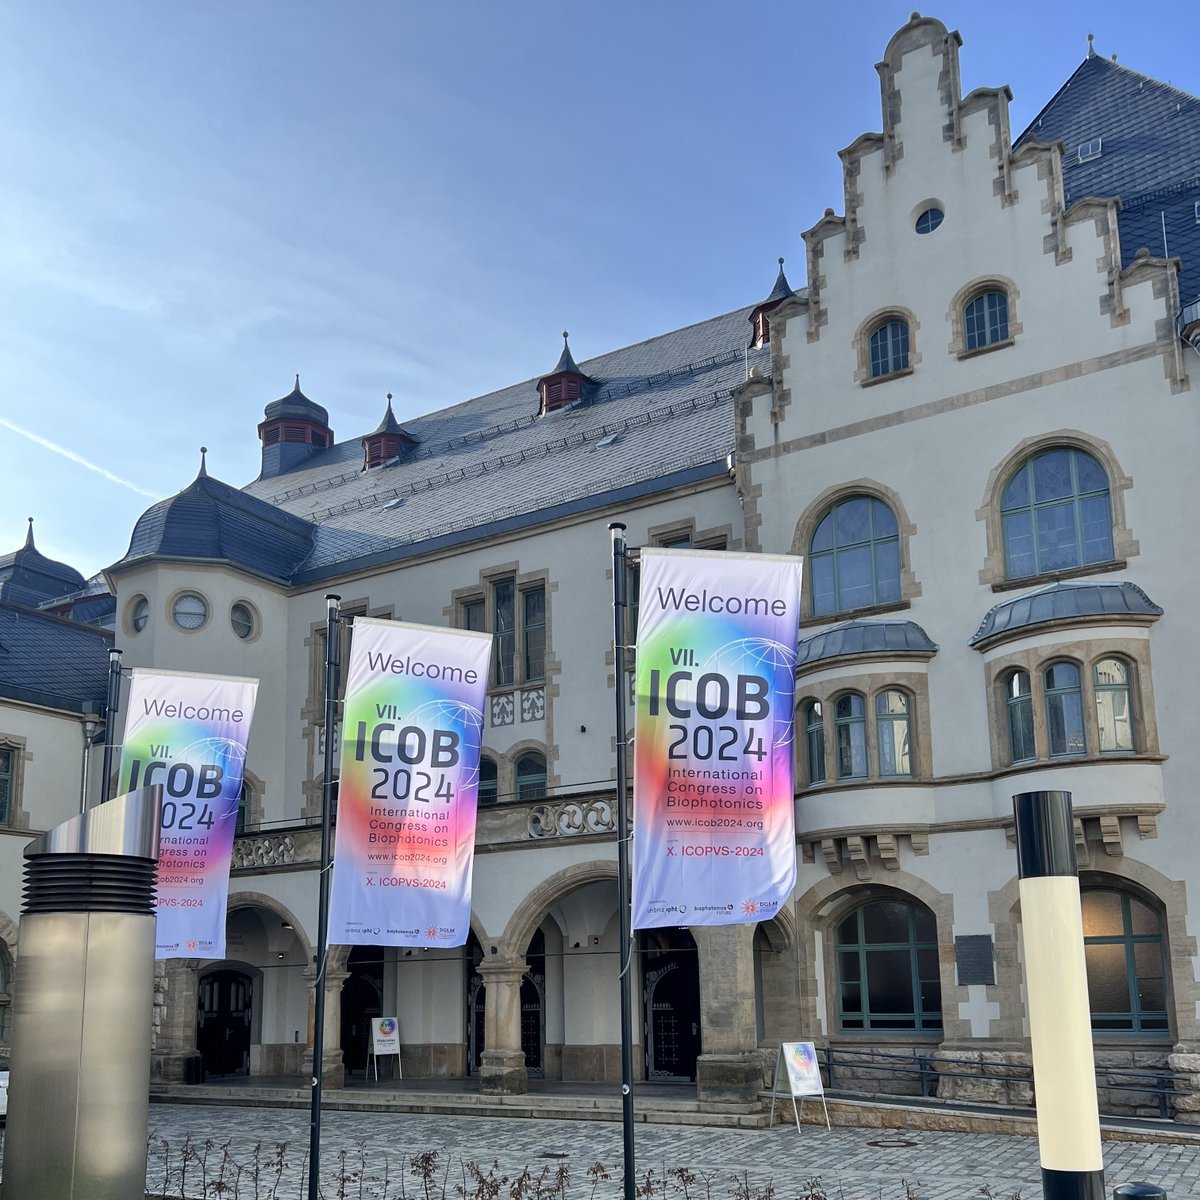 🎉Congratulate the conference ICOB 2024 on its complete success! @Leibniz_IPHT 🥼 Our guest editors, Dr. Pallua, Dr. Huck and Dr. Popp attended and gave presentations. 👏 Their SI 'Optical Imaging for Biomedical Applications' is open for submissions: mdpi.com/journal/bioeng…